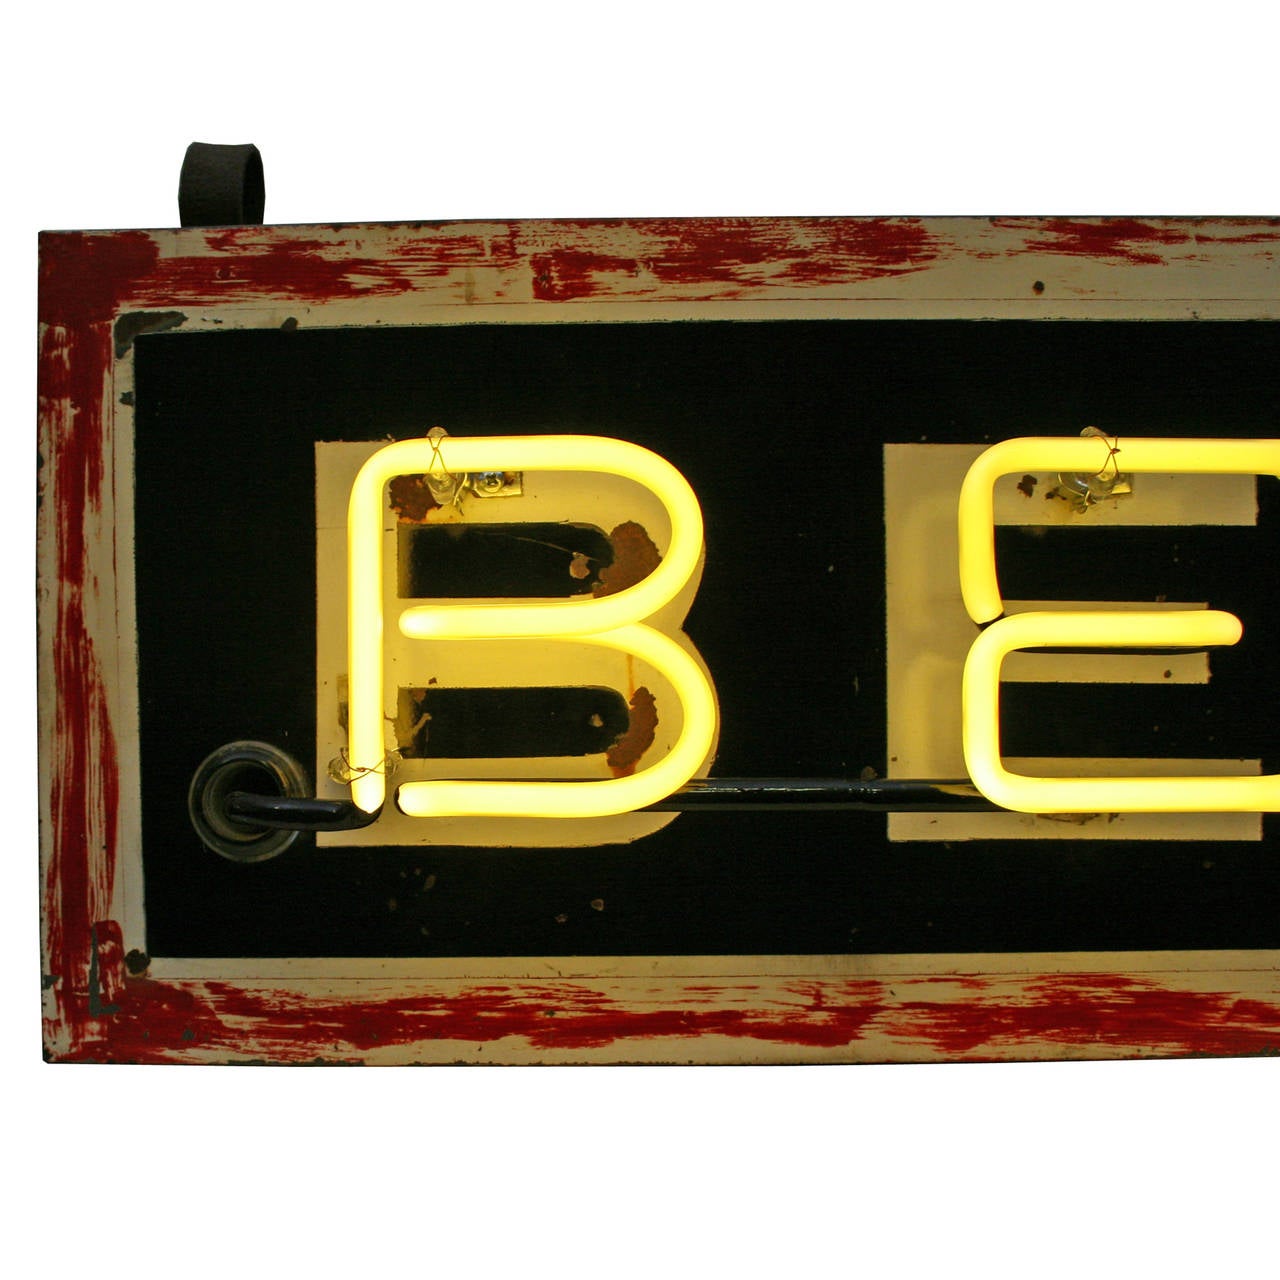 Worn and rusted, we love this reclaimed neon sign almost as much as what its advertising. Perfect for a bar or restaurant (really, anywhere), this Mid-Century sign boasts a hand-painted black, red and white composition, with glowing 'pilsner yellow'